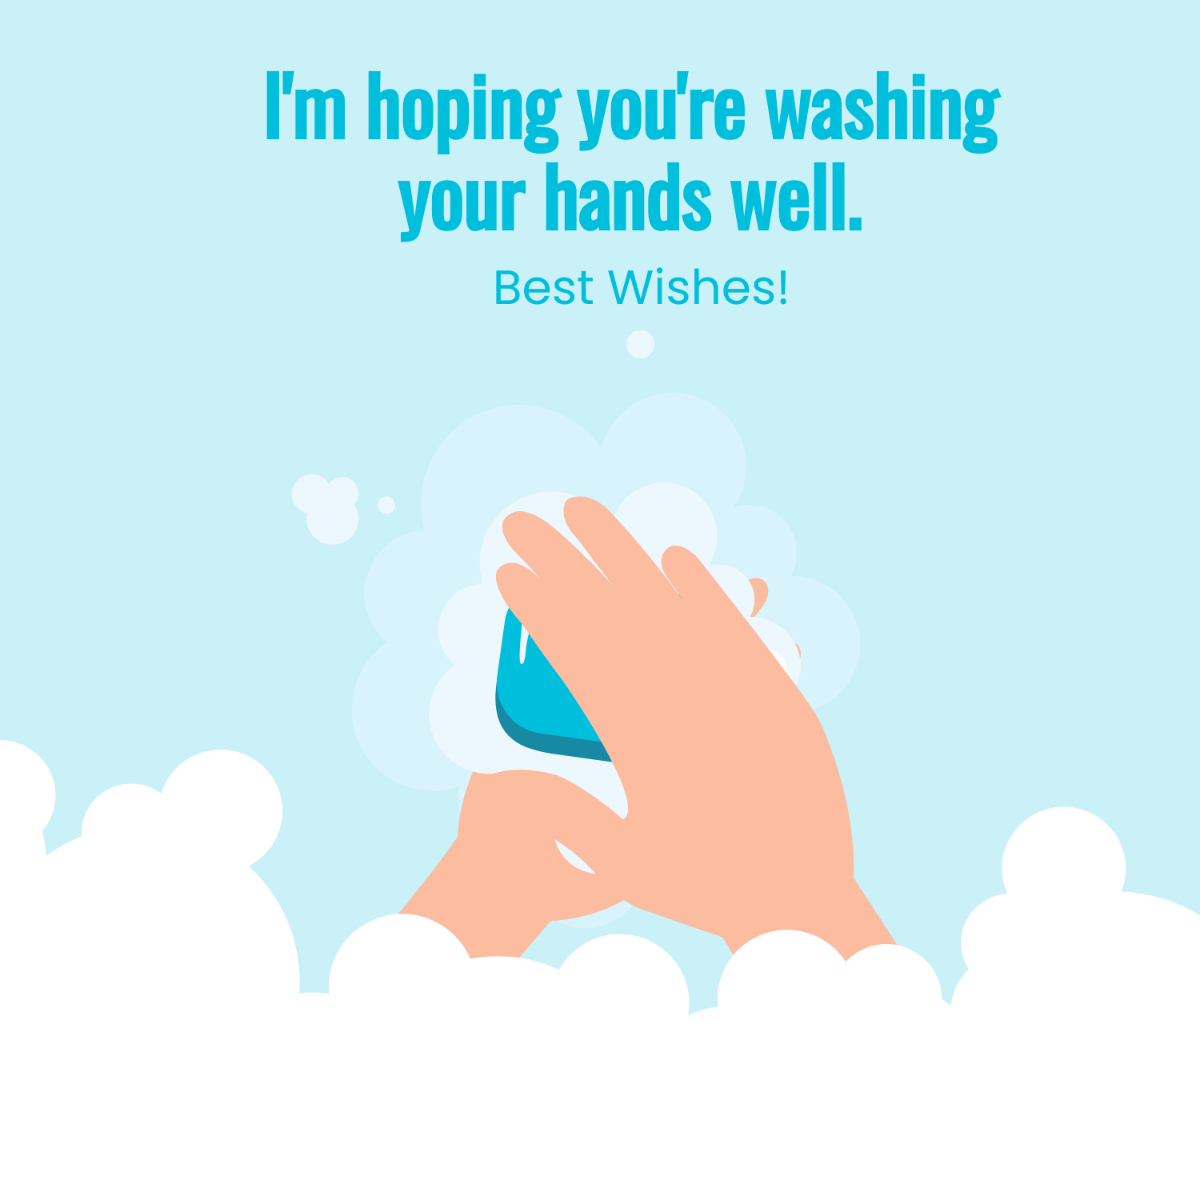 Global Handwashing Day Wishes Vector Template